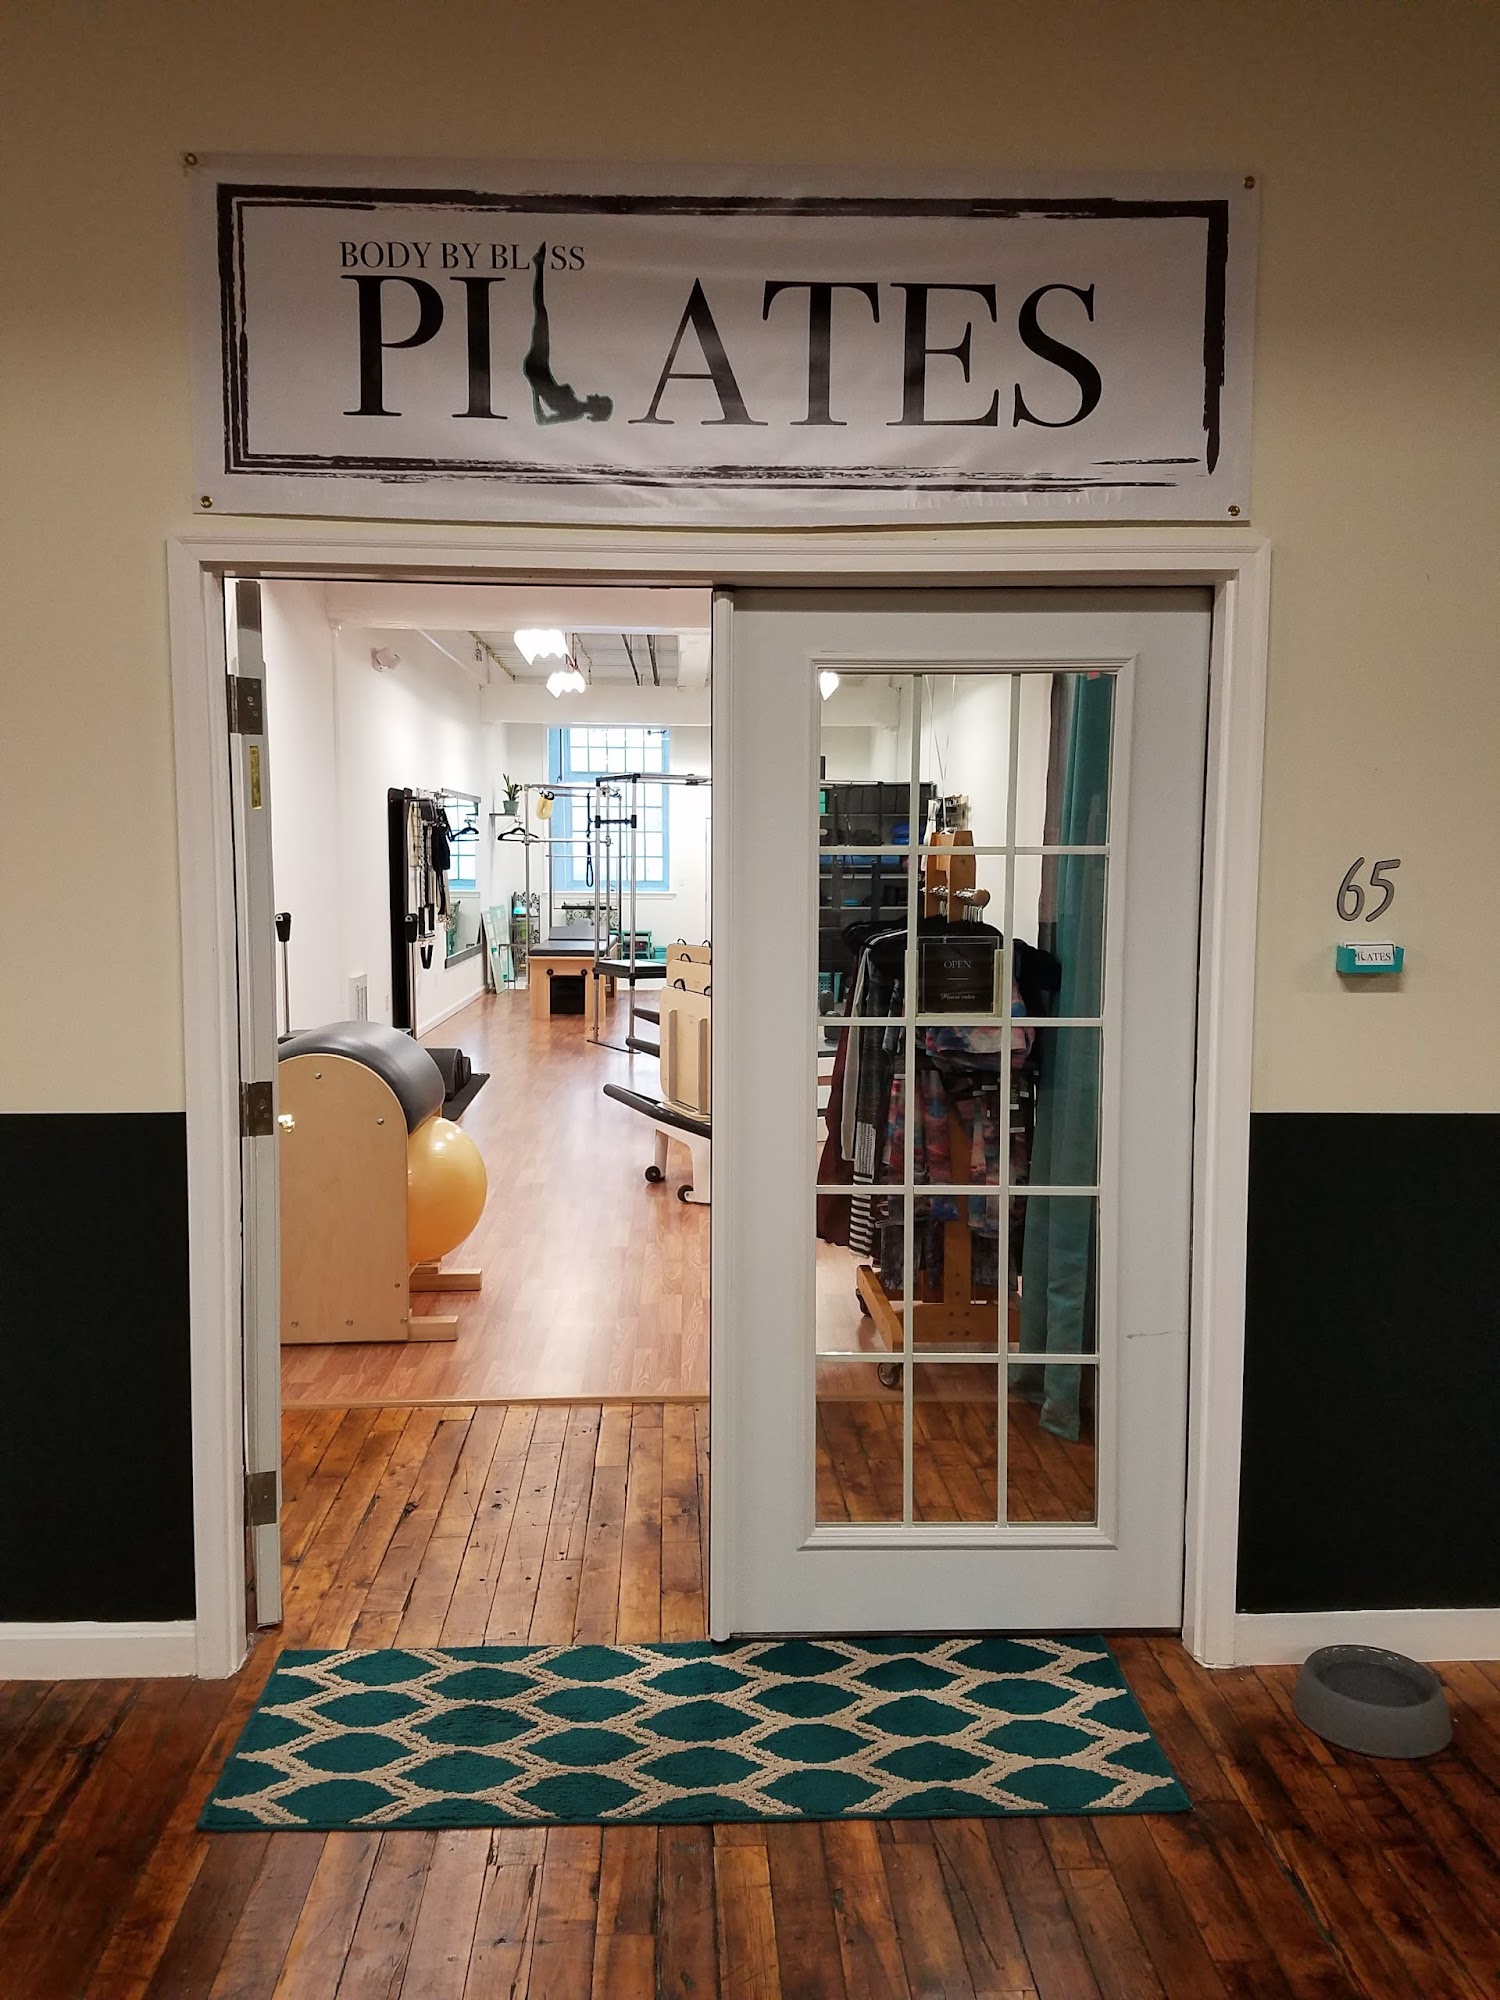 Body By Bliss Pilates (Within the Velvet Mill) 22 Bayview Ave #63, Stonington Connecticut 06378